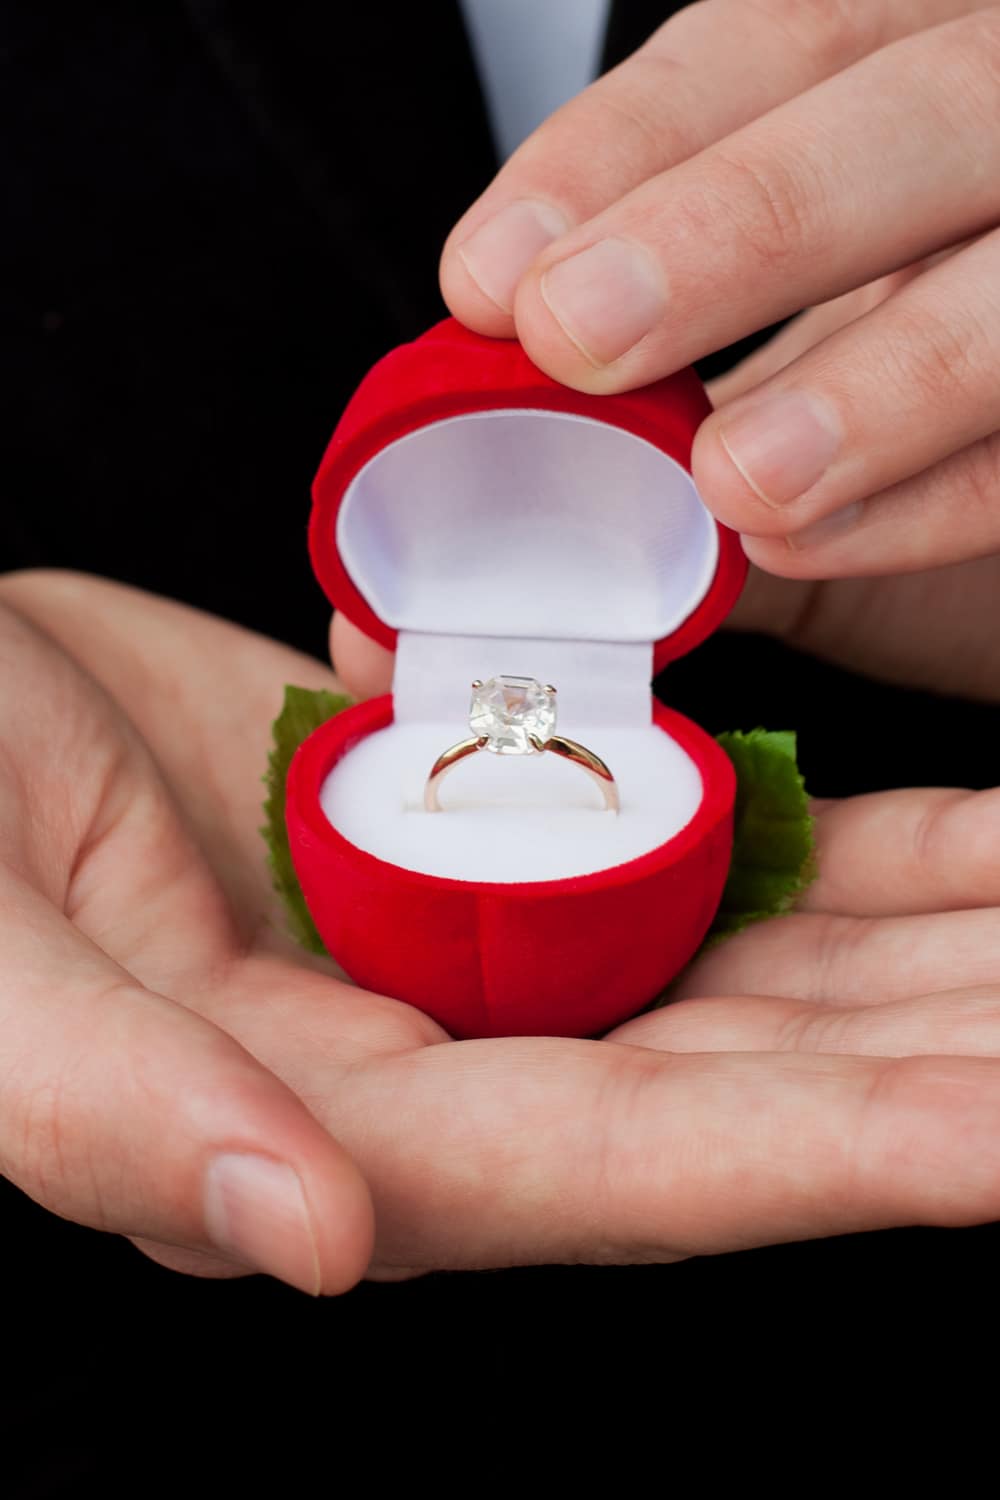 The Average Price of an Engagement Ring